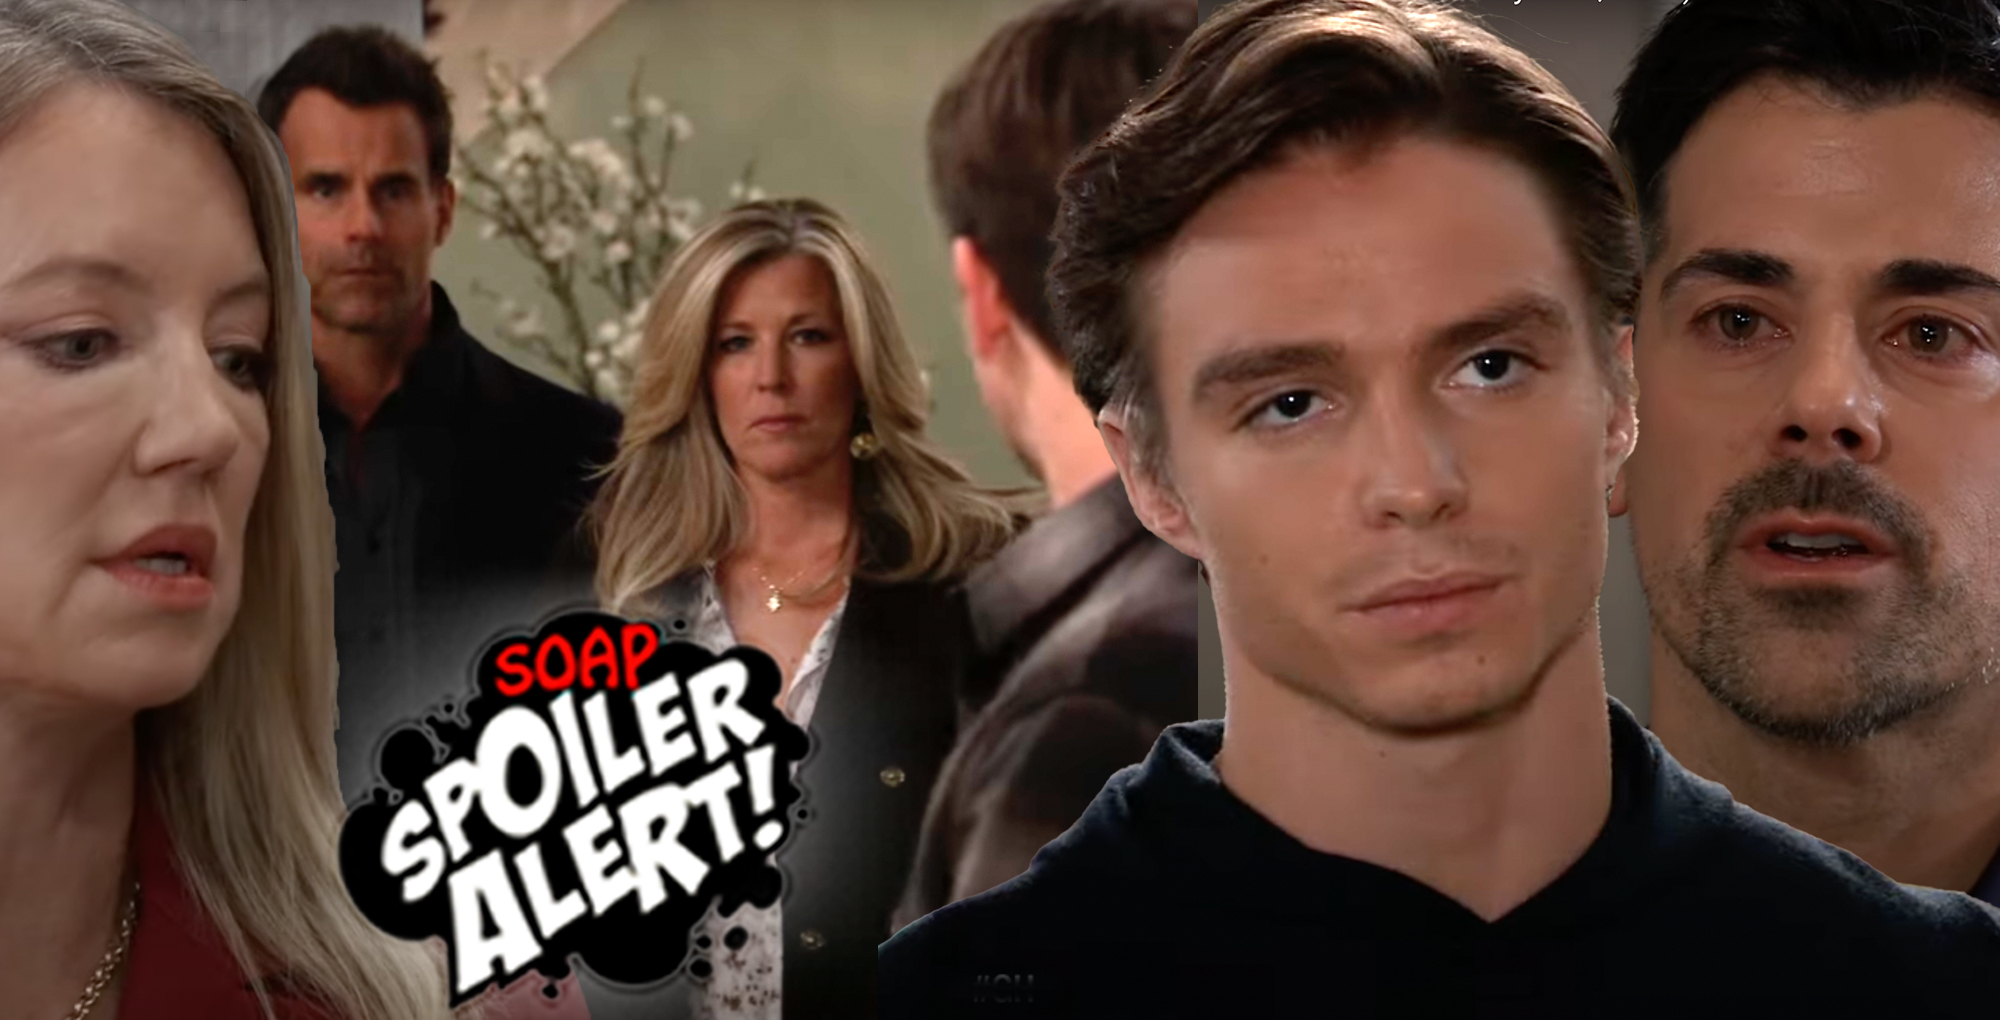 gh spoilers video collage of nina, drew, carly, spencer, and nikolas.